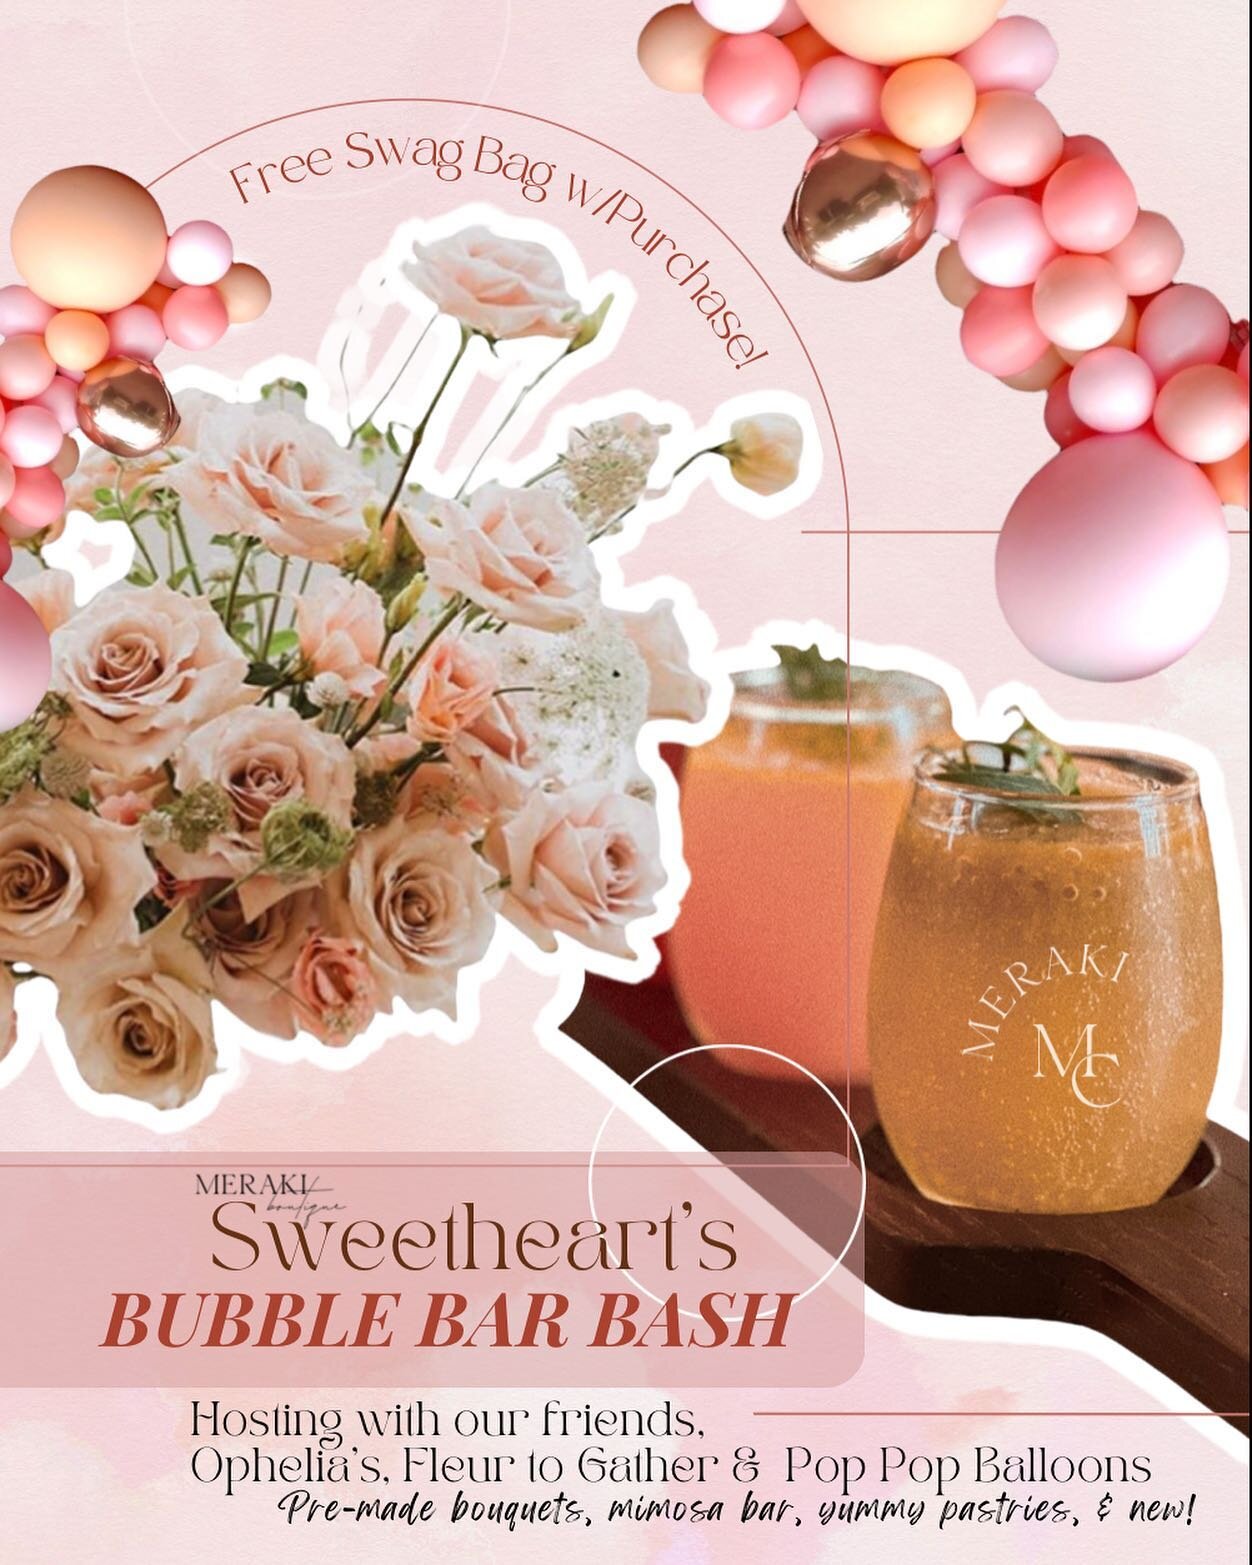 Meraki, Ophelia’s, Fleur to Gather, and Pop Pop Balloons are hosting a Sweetheart’s Bubble Bar Bash brunch and shop event with pre-made bouquets, a mimosa bar, pastries, and swag bags.